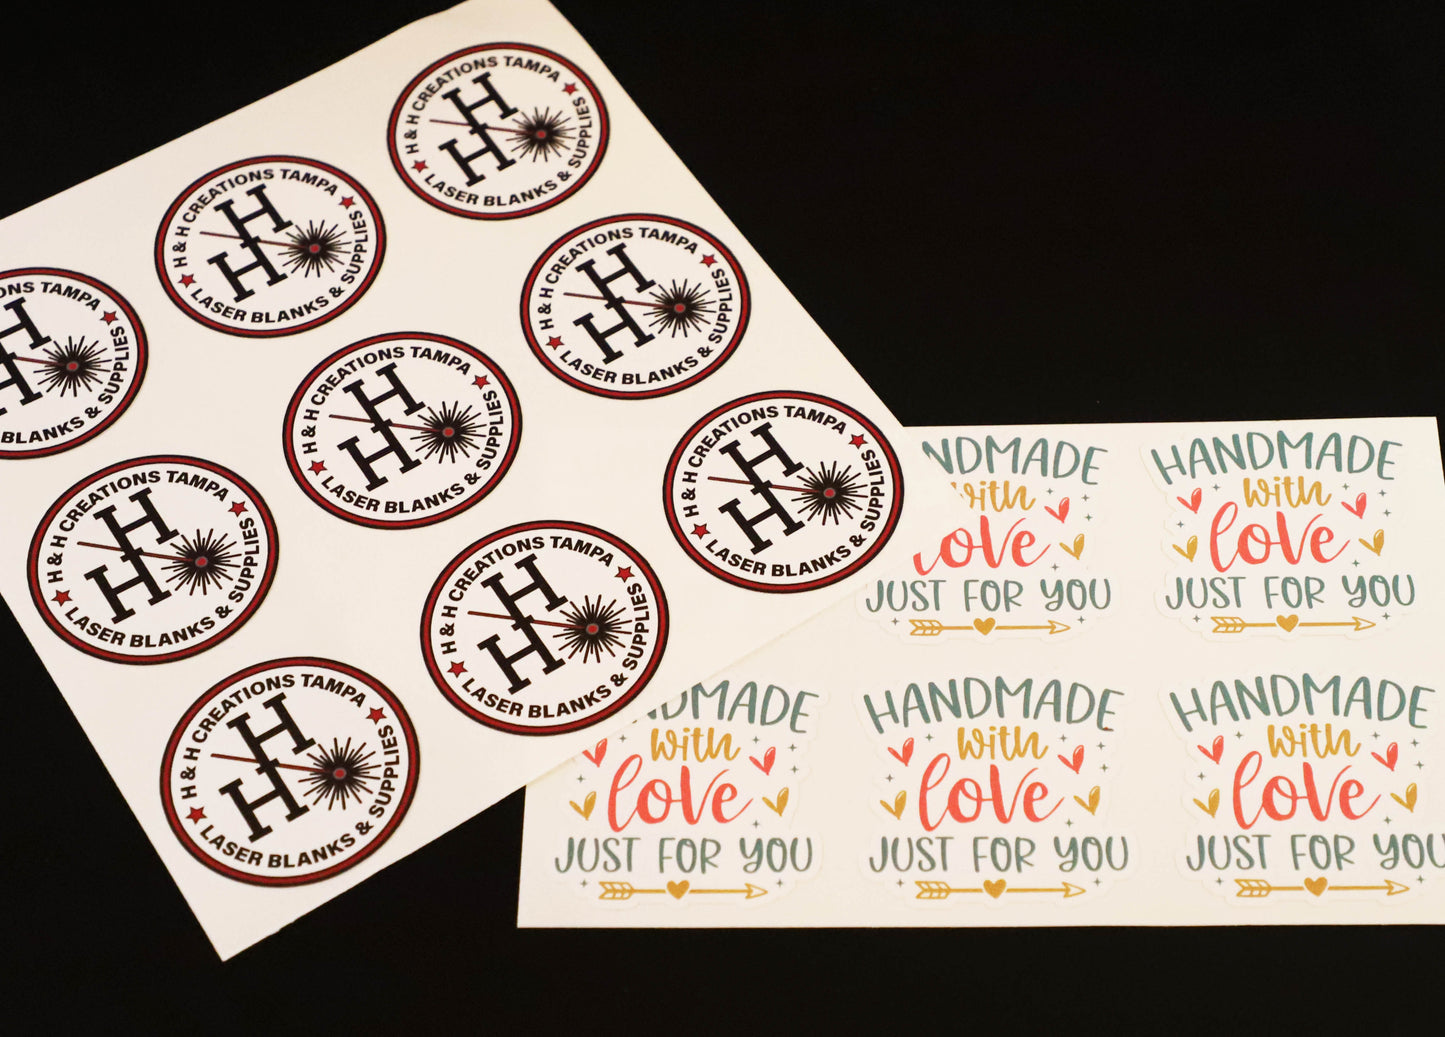 Vinyl Stock Business Stickers - Thank You/Hand Made with Love You - For Shopping at My Small Business